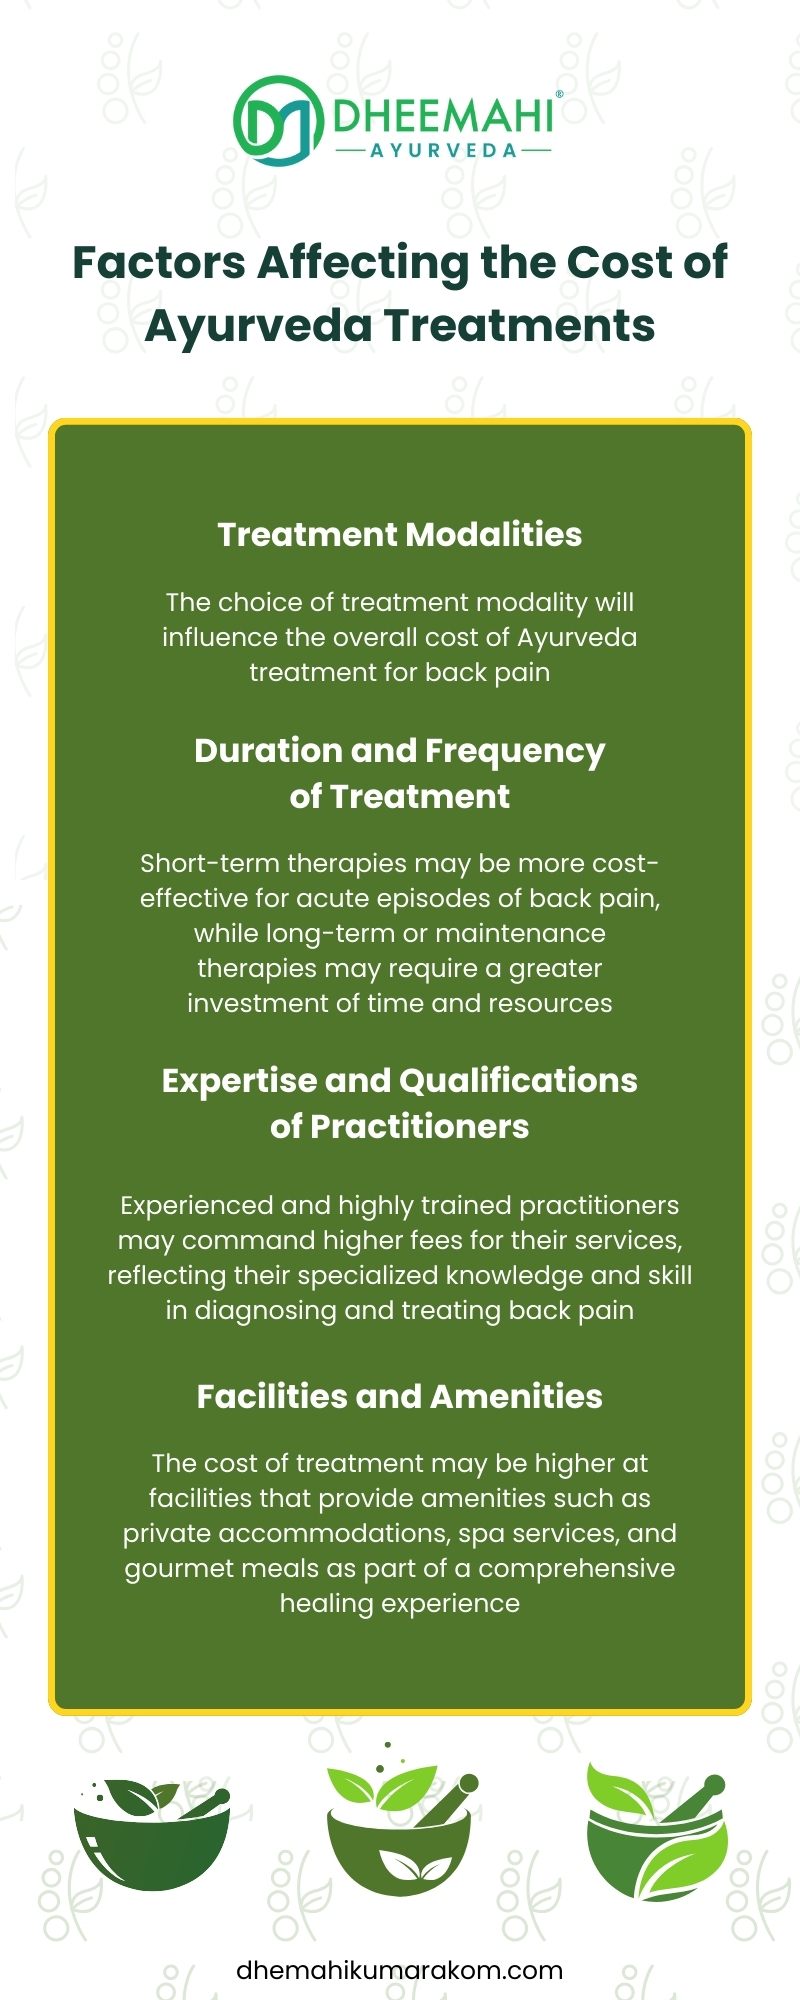 Factors Affecting the Cost of Ayurveda Treatments